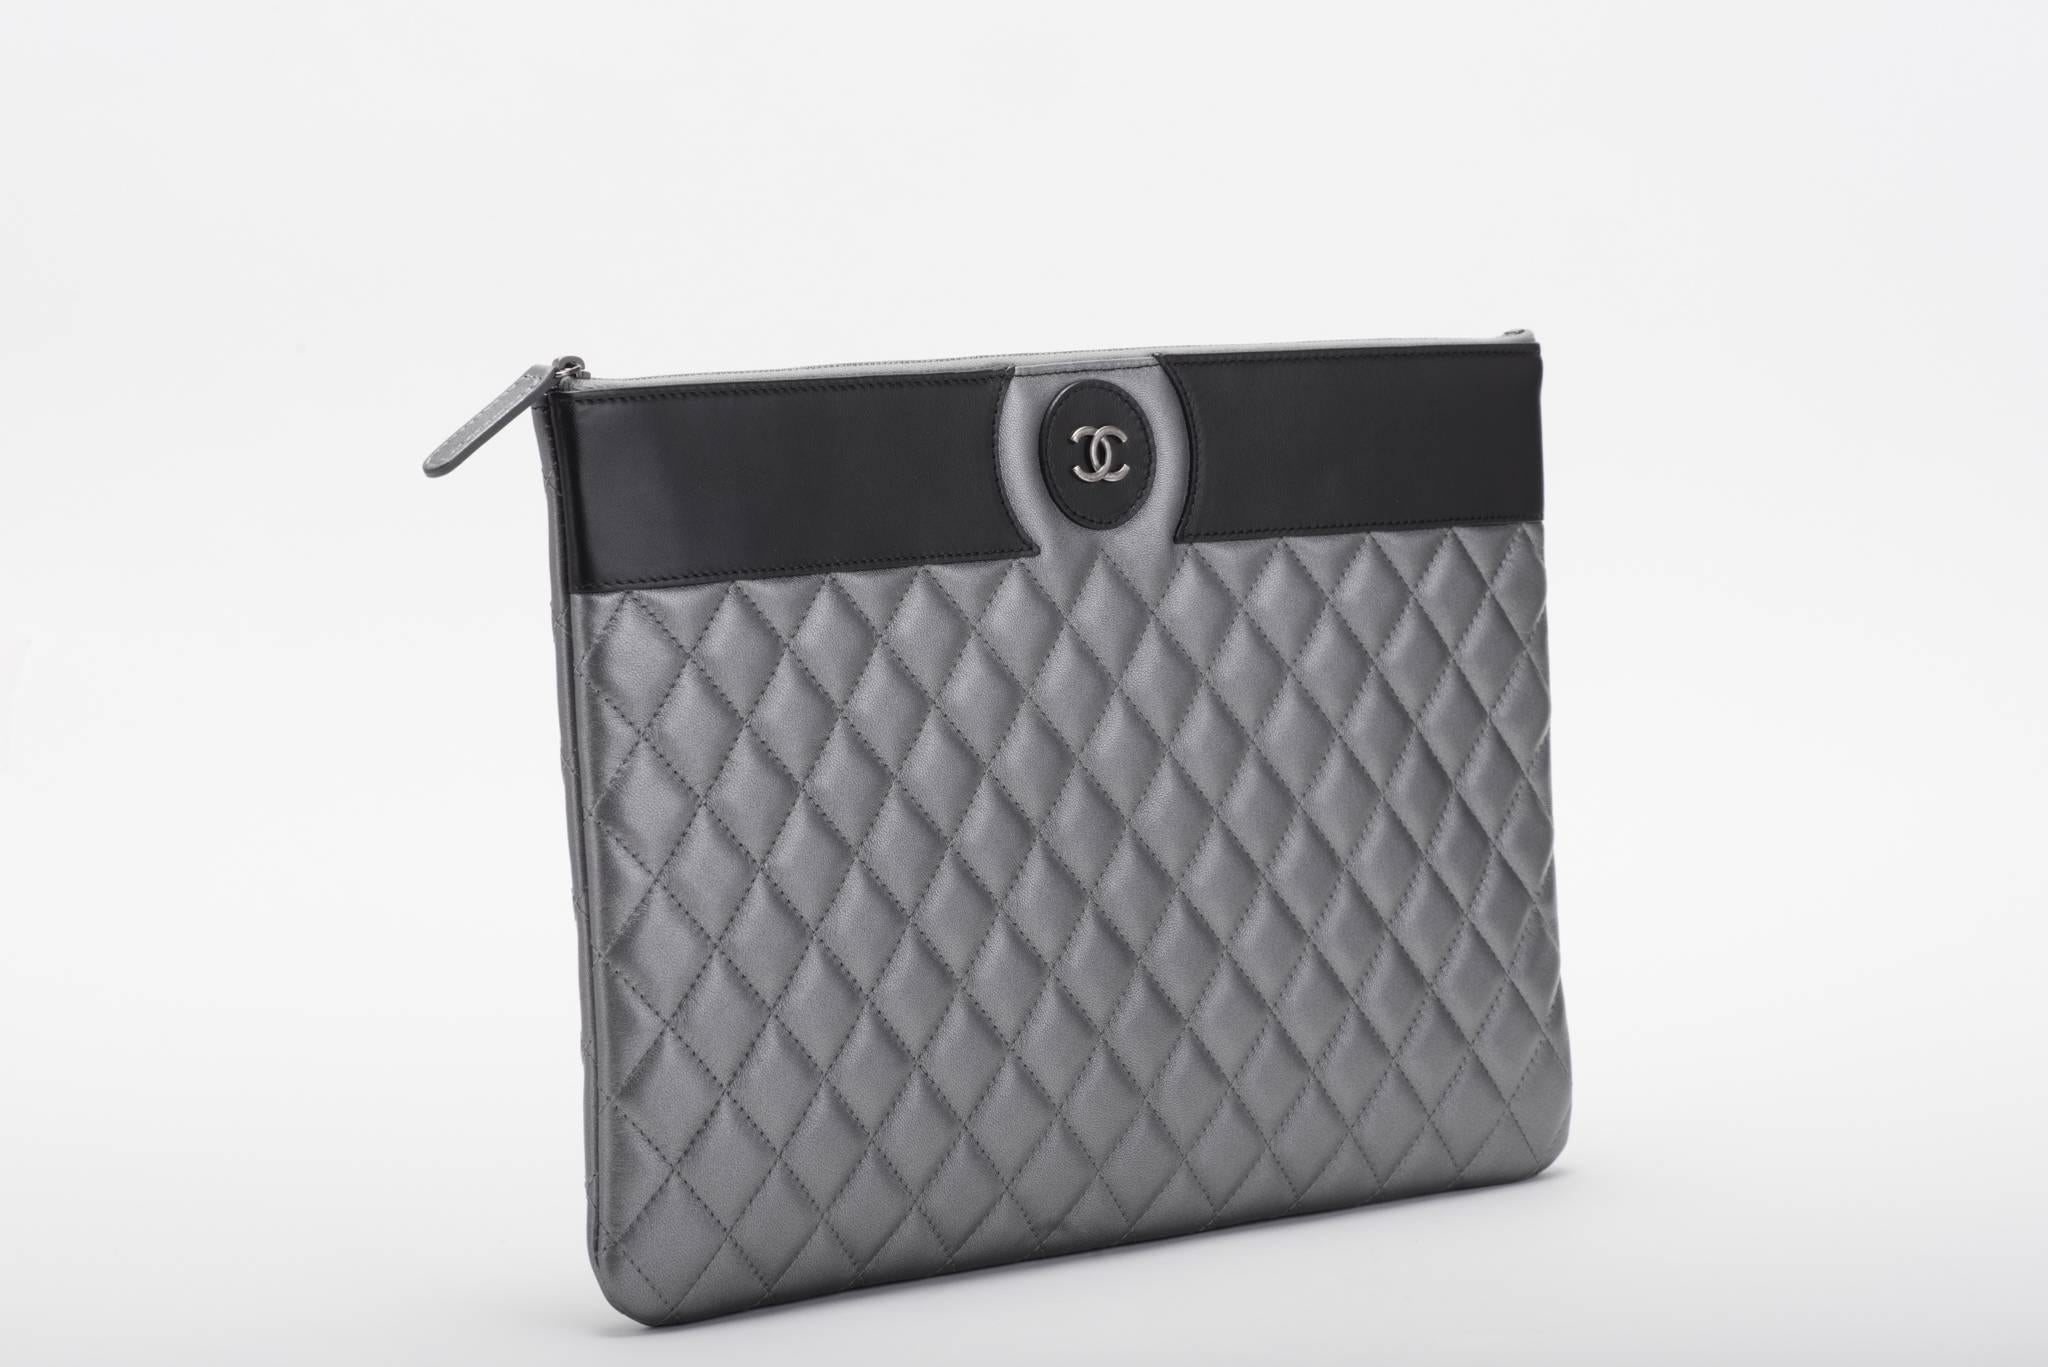 Chanel brand new in box timeless black and pewter quilted clutch. Signature center CC logo. Comes with hologram, ID card, booklet, box and ribbon.